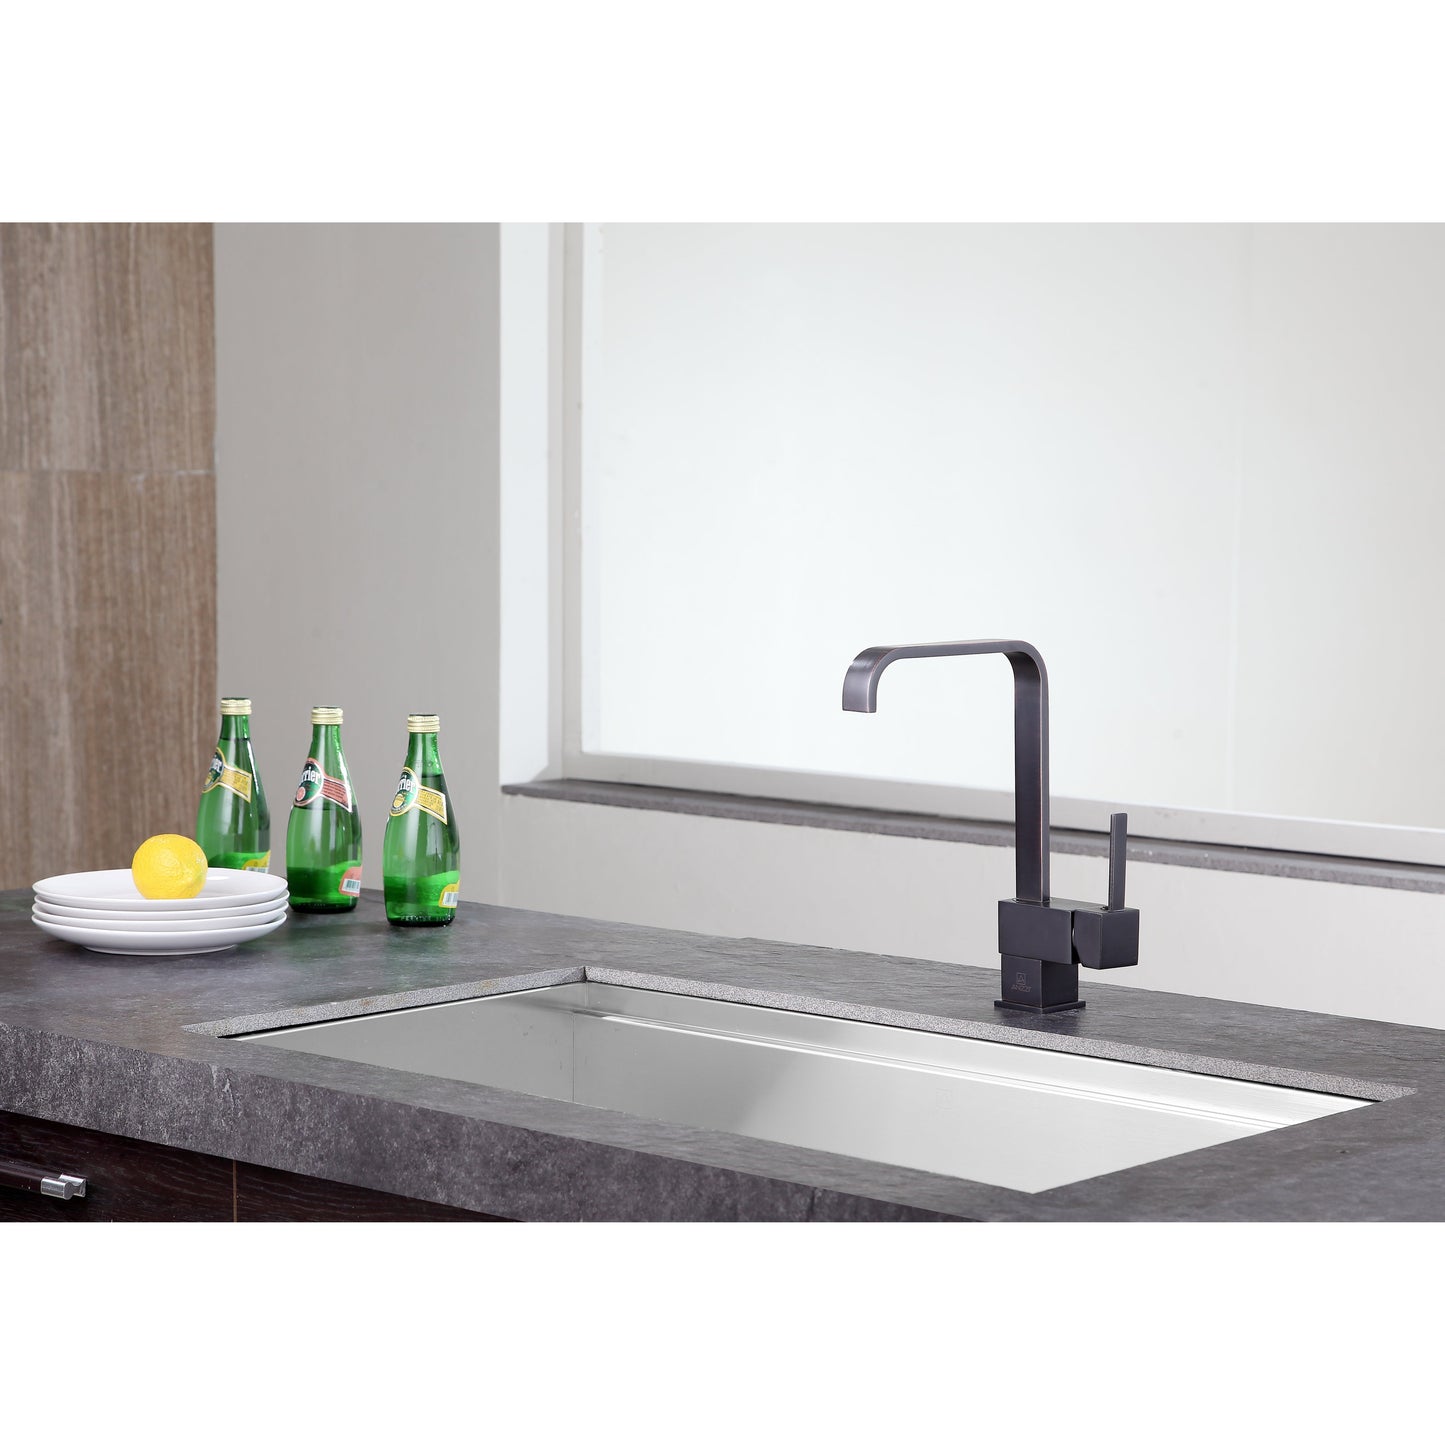 ANZZI Sabre Series Single Hole Oil Rubbed Bronze Kitchen Faucet